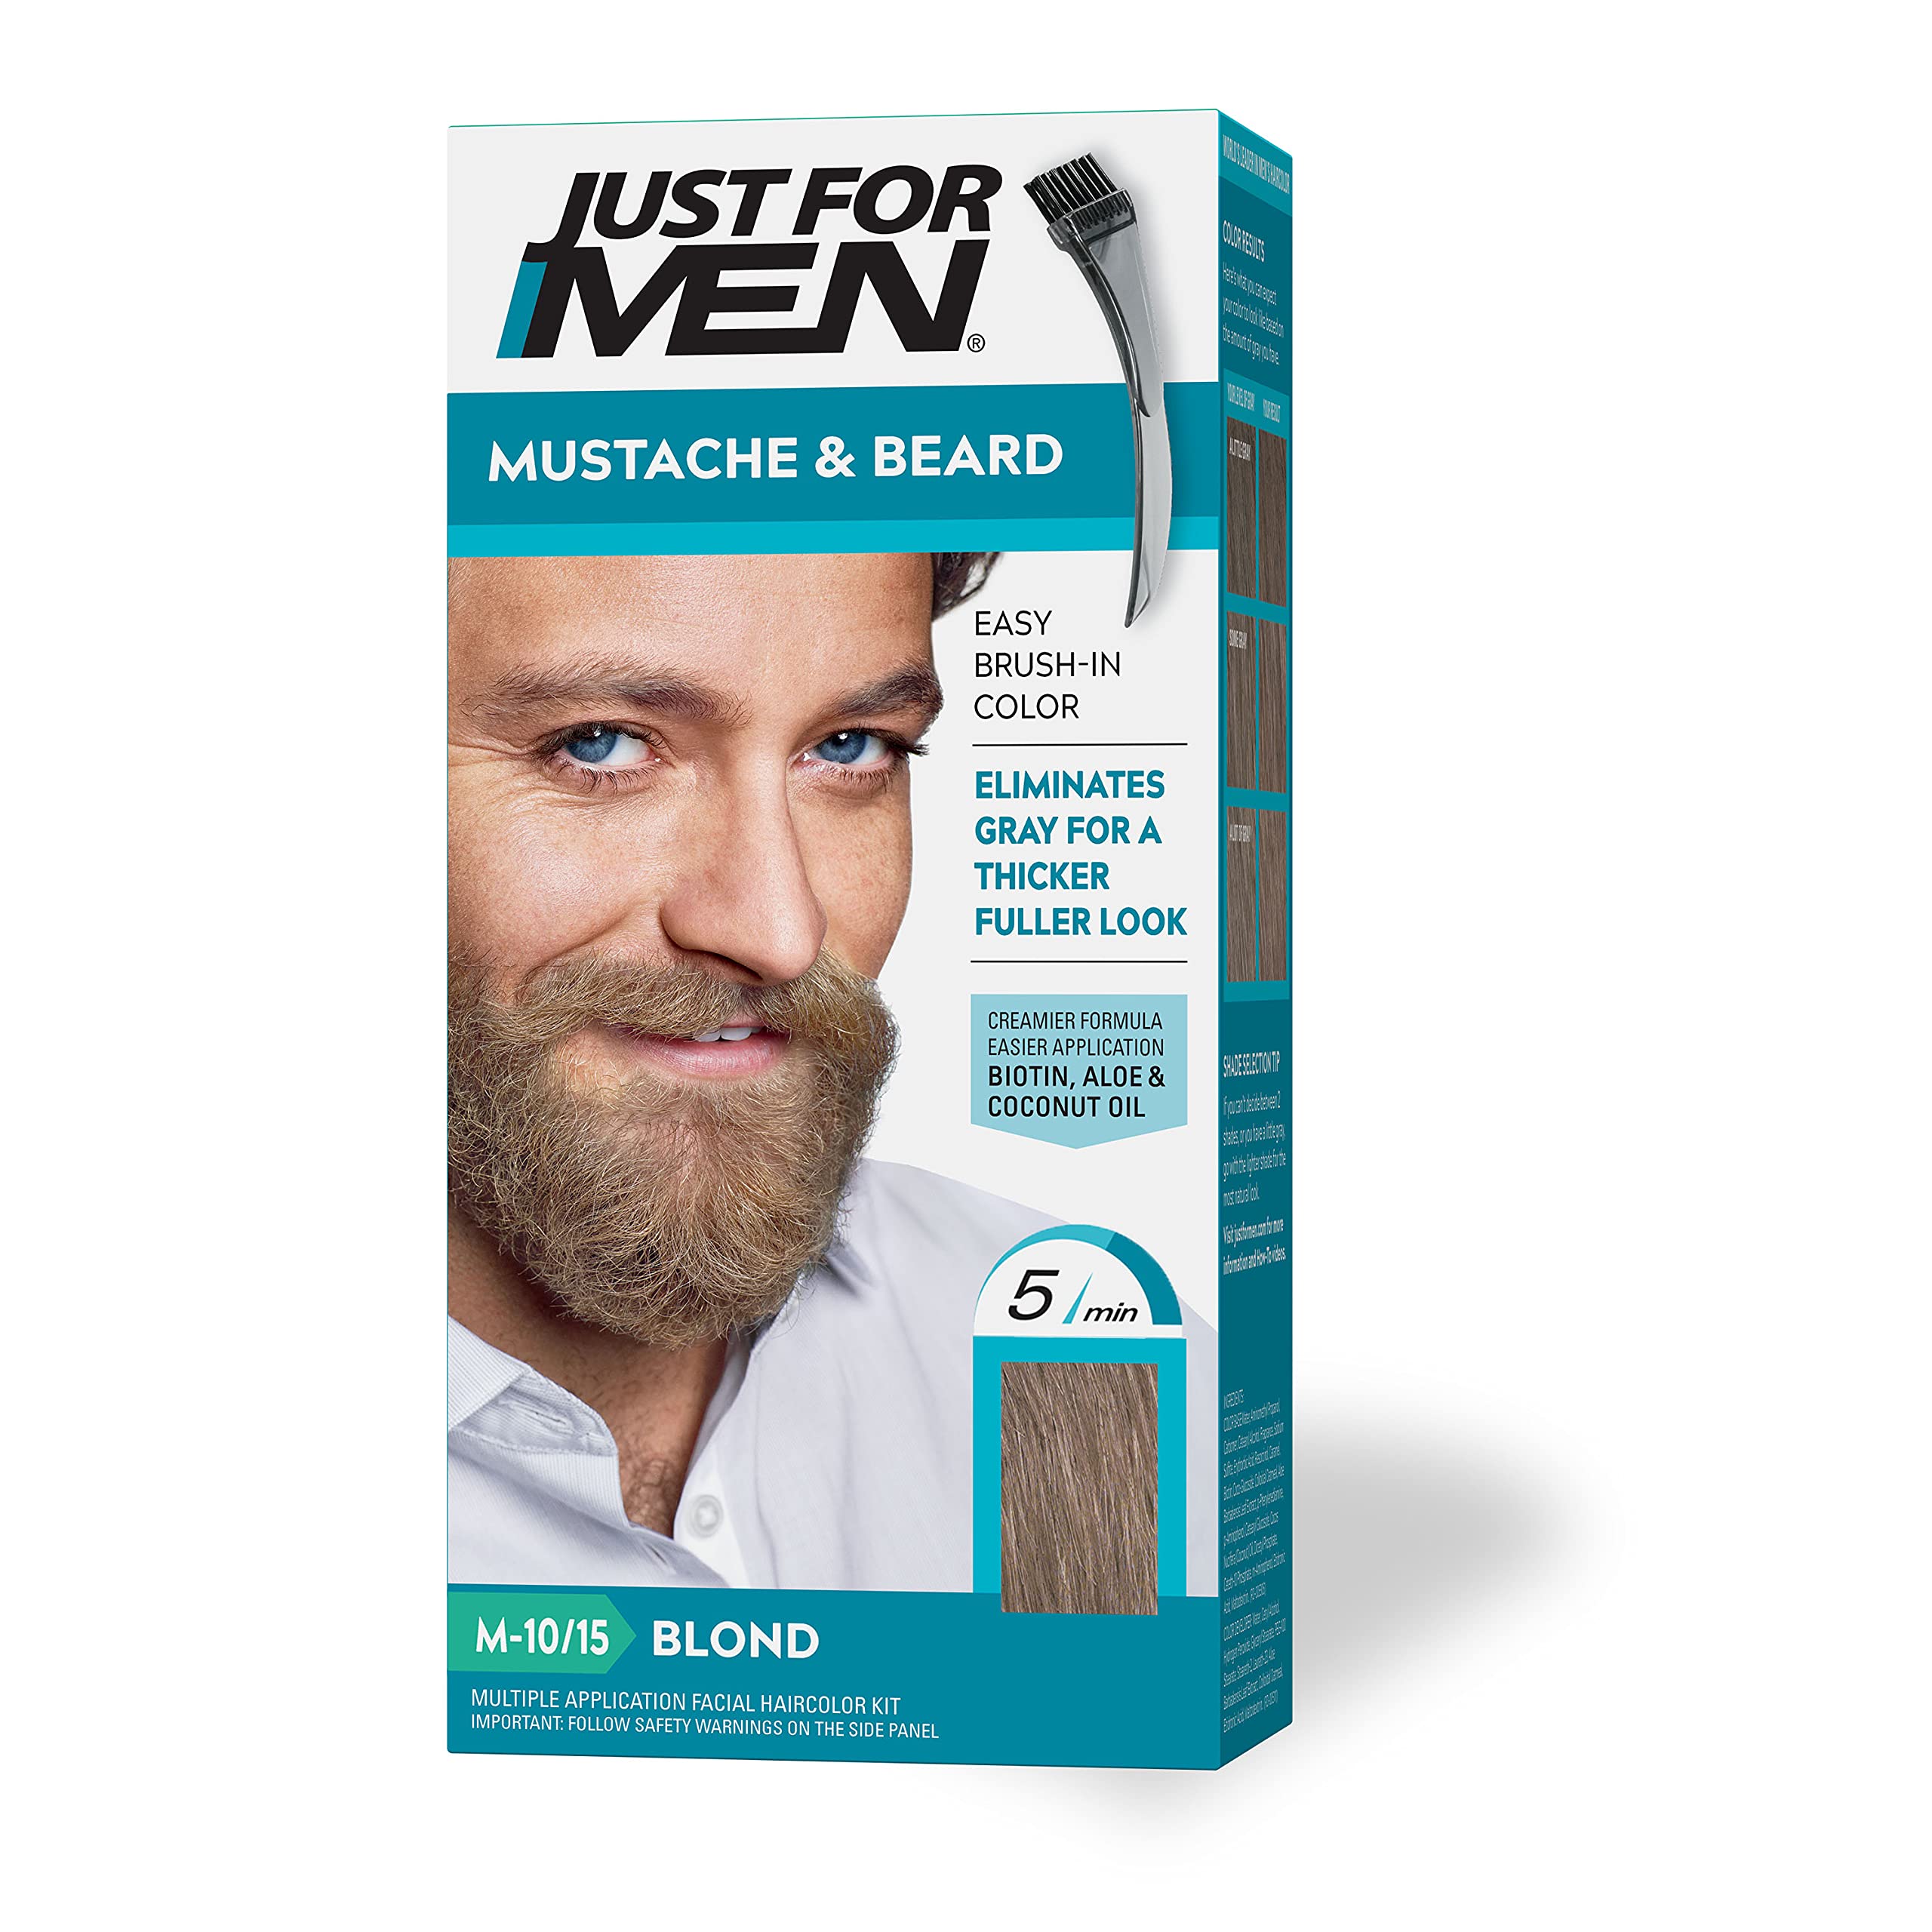 Just For Men Mustache & Beard, Beard Dye for Men with Brush Included for Easy Application, With Biotin Aloe and Coconut Oil for Healthy Facial Hair - Blond, M-10/15, Pack of 1